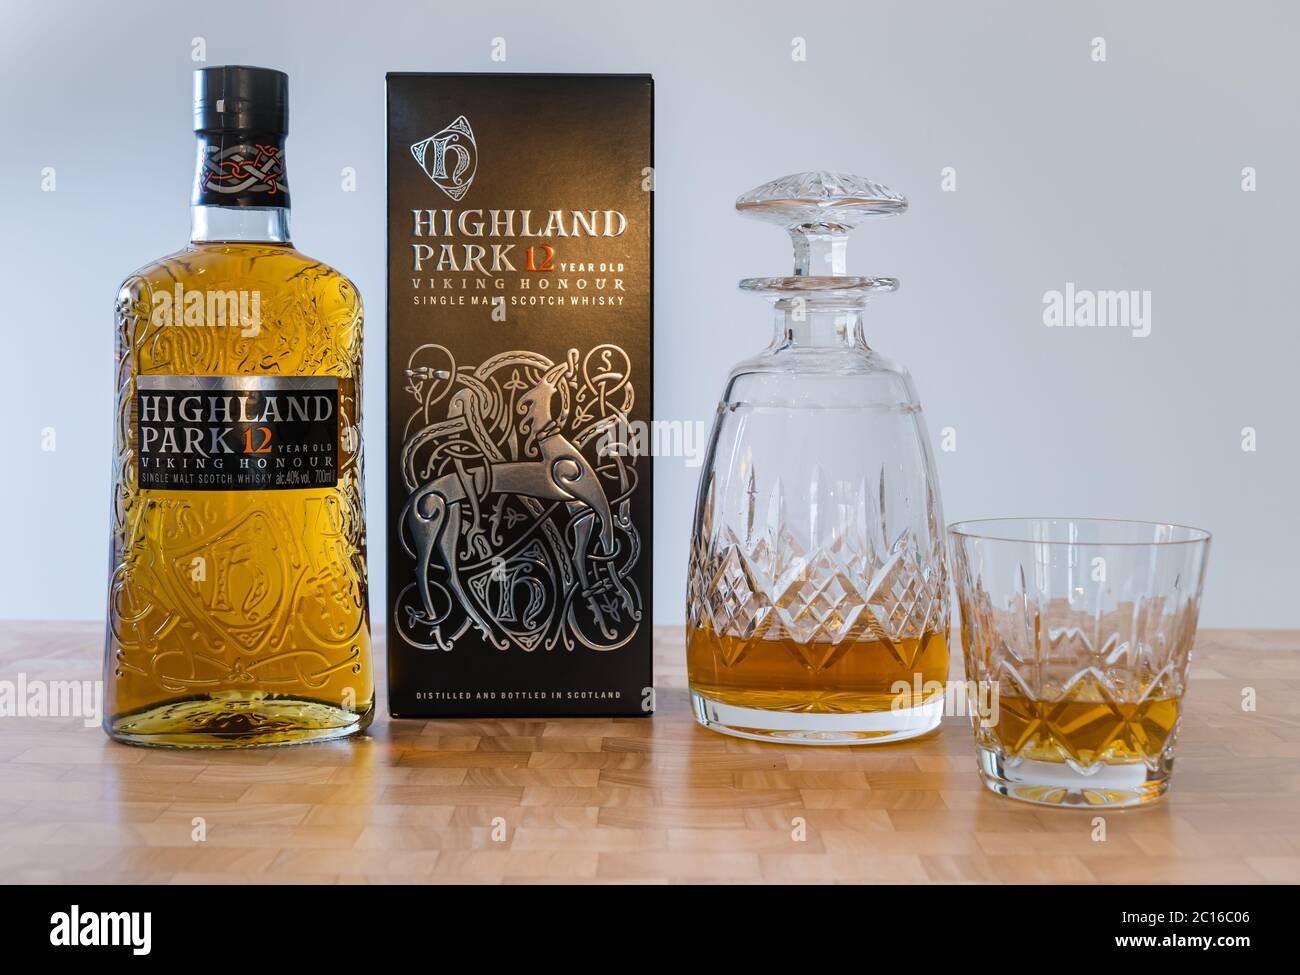 Highland Park Viking Honour Scotch malt whisky bottle with crystal decanter and whisky glass Stock Photo